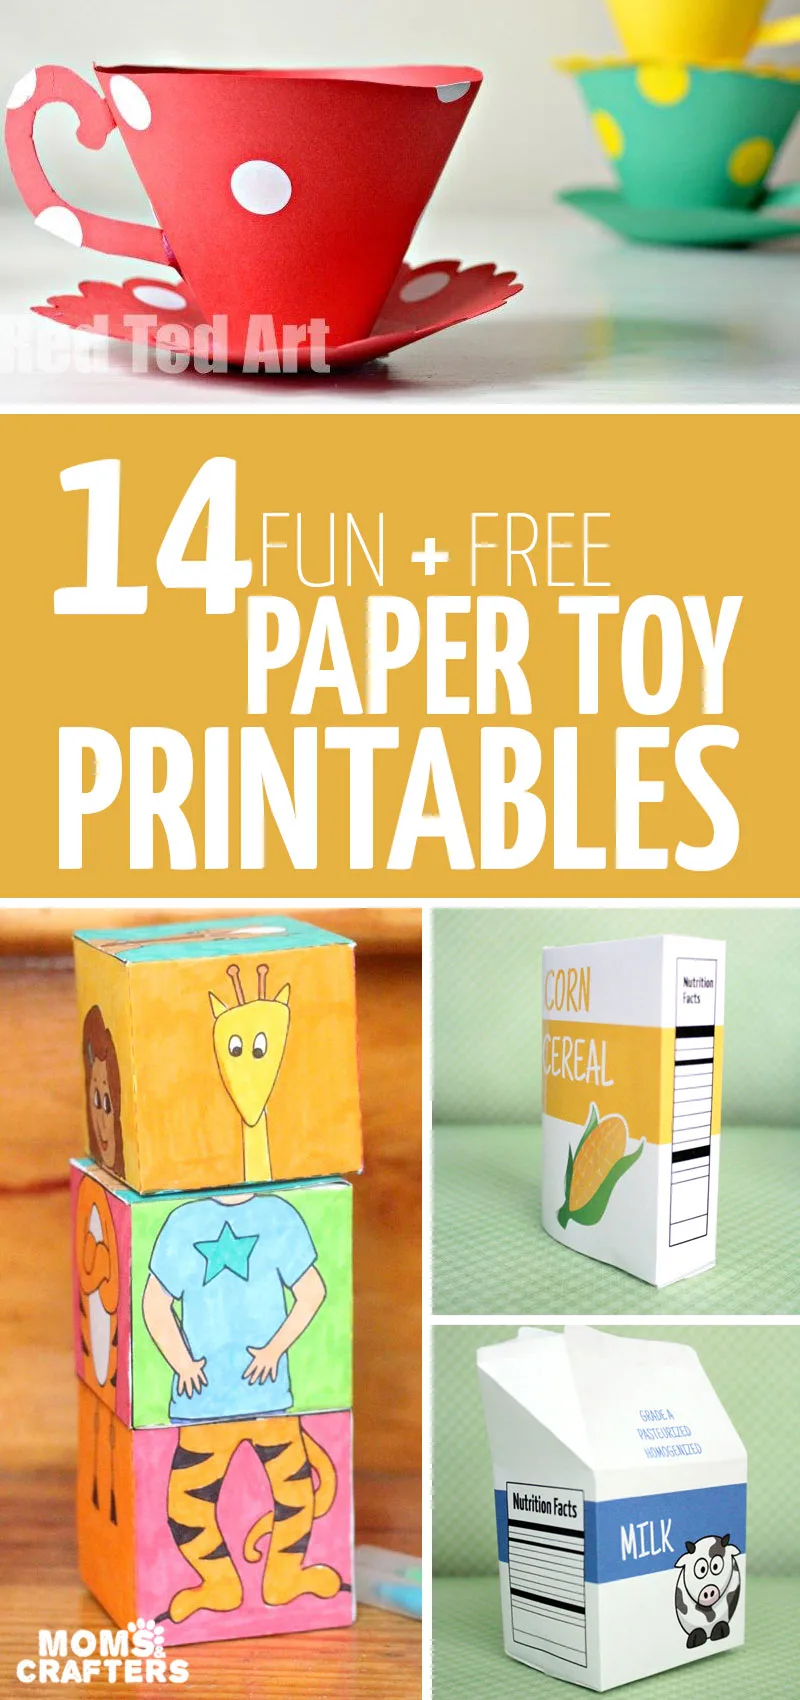 Click for a list of super cool free printable paper toy templates you can download! You'll love these paper crafts for moms and kids that can be played with when you're done crafting them #papercraft #papertoy #coloringpage